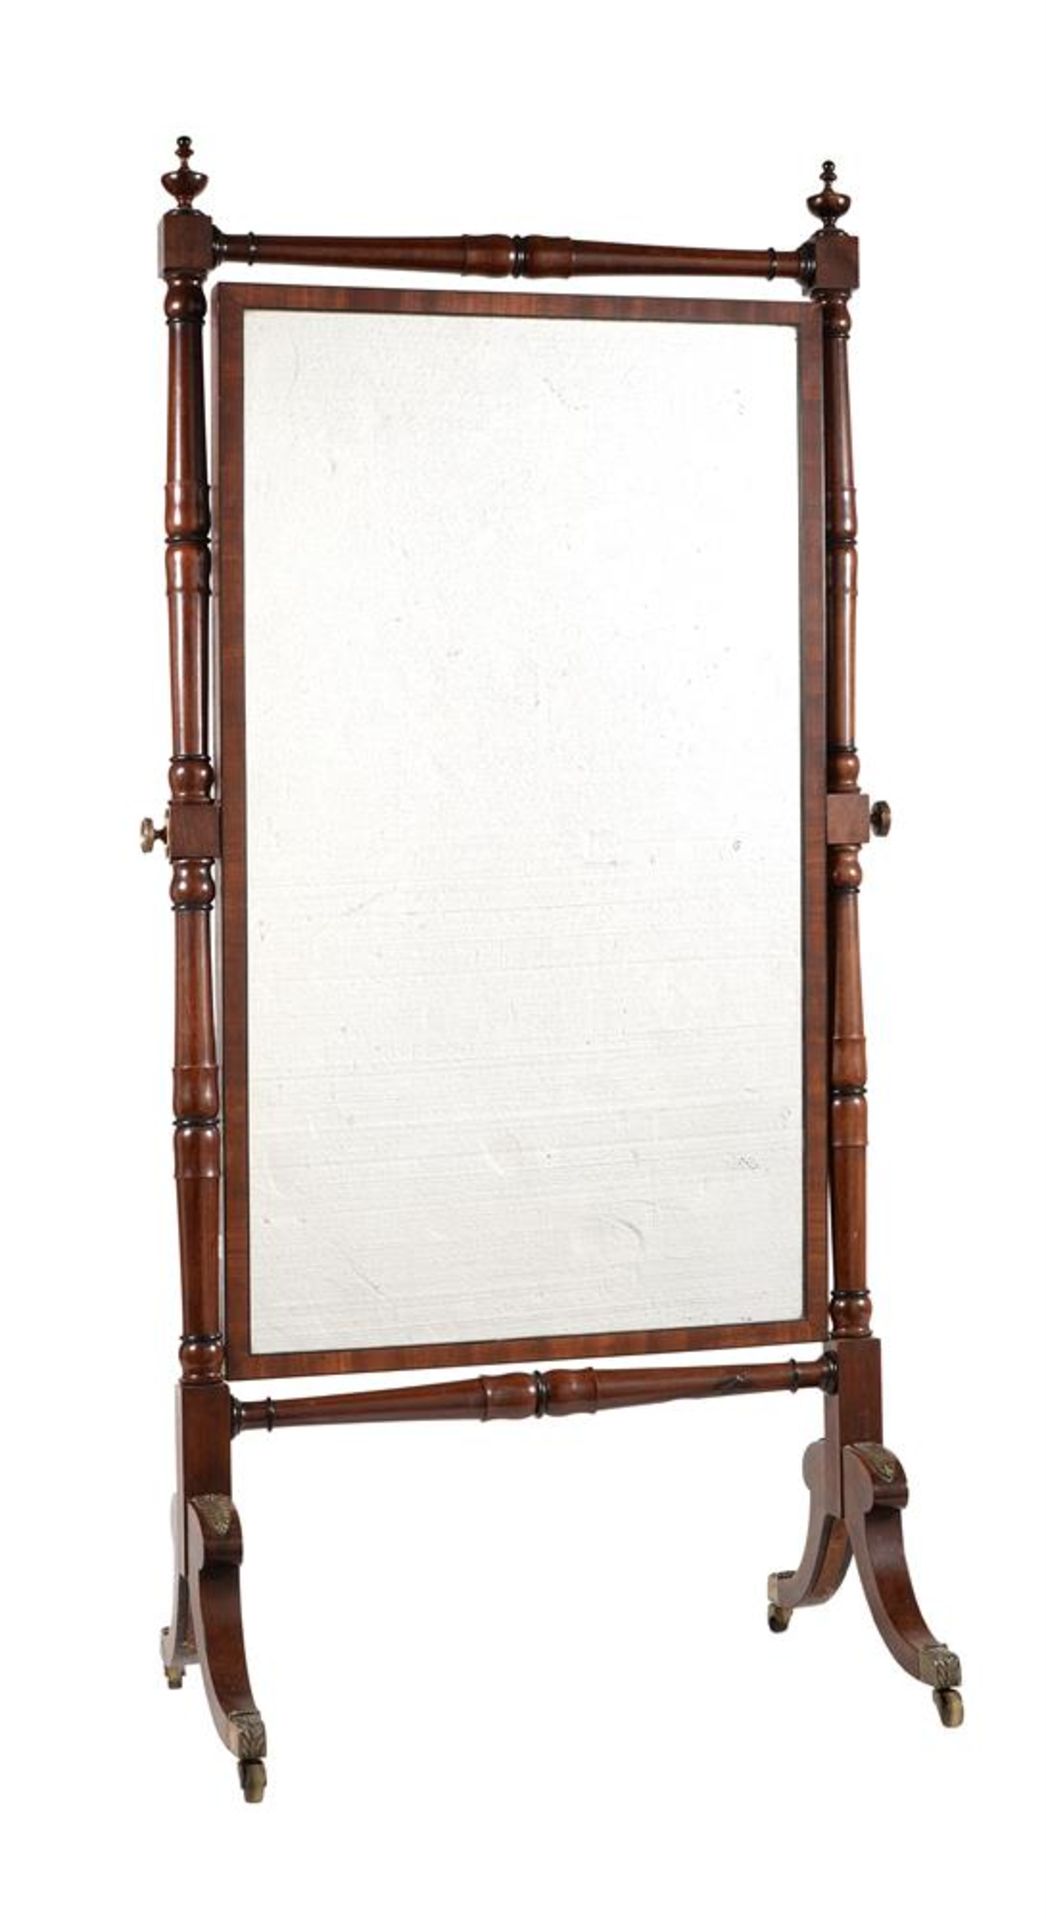 A GEORGE IV MAHOGANY AND GILT METAL MOUNTED CHEVAL MIRROR